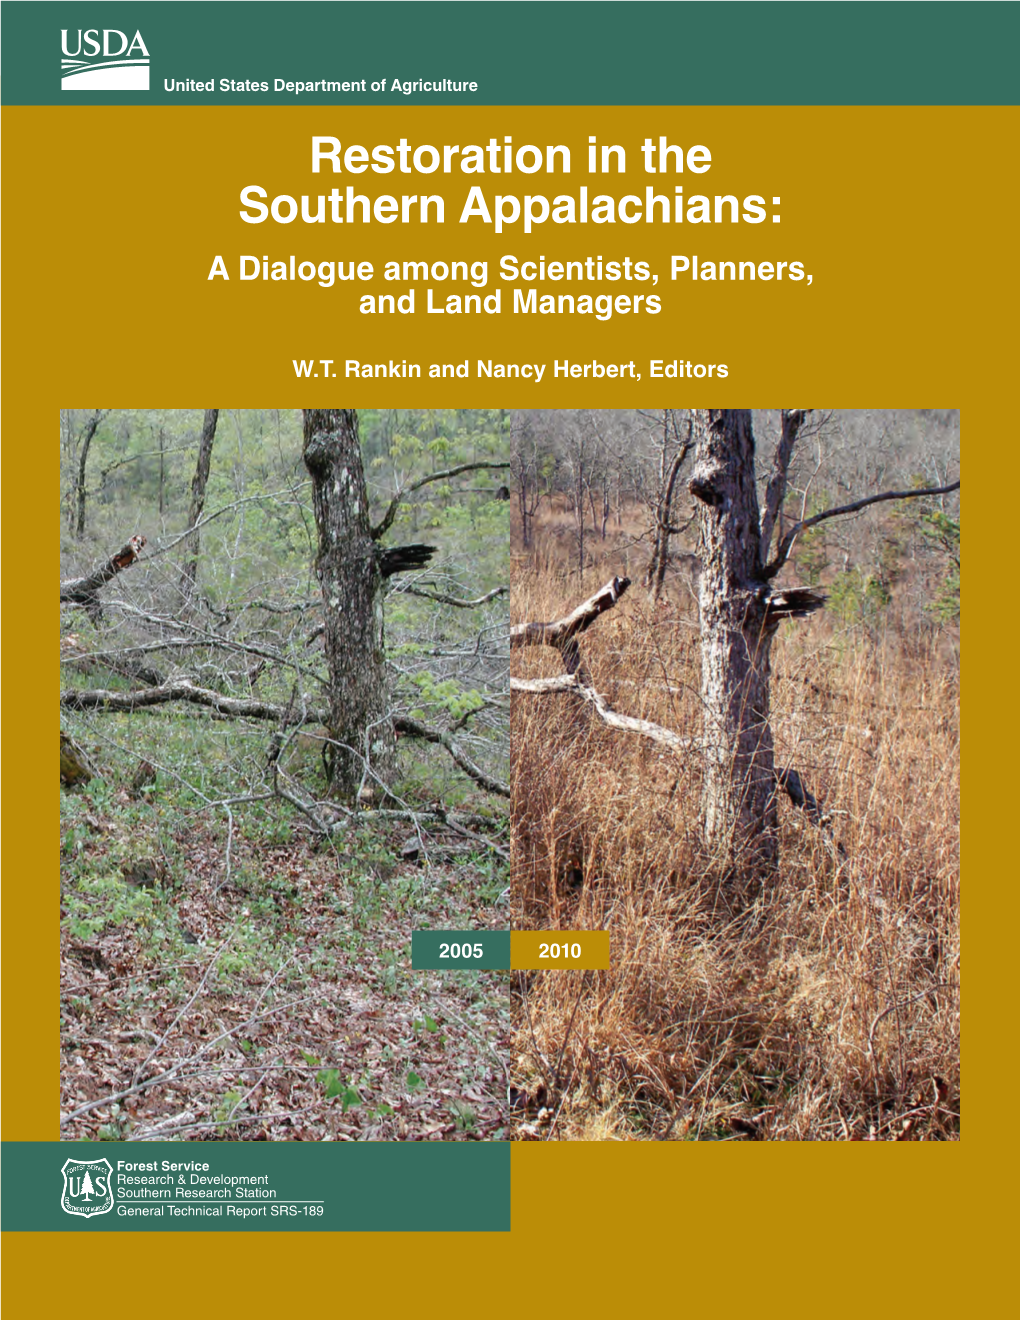 Restoration in the Southern Appalachians: a Dialogue Among Scientists, Planners, and Land Managers